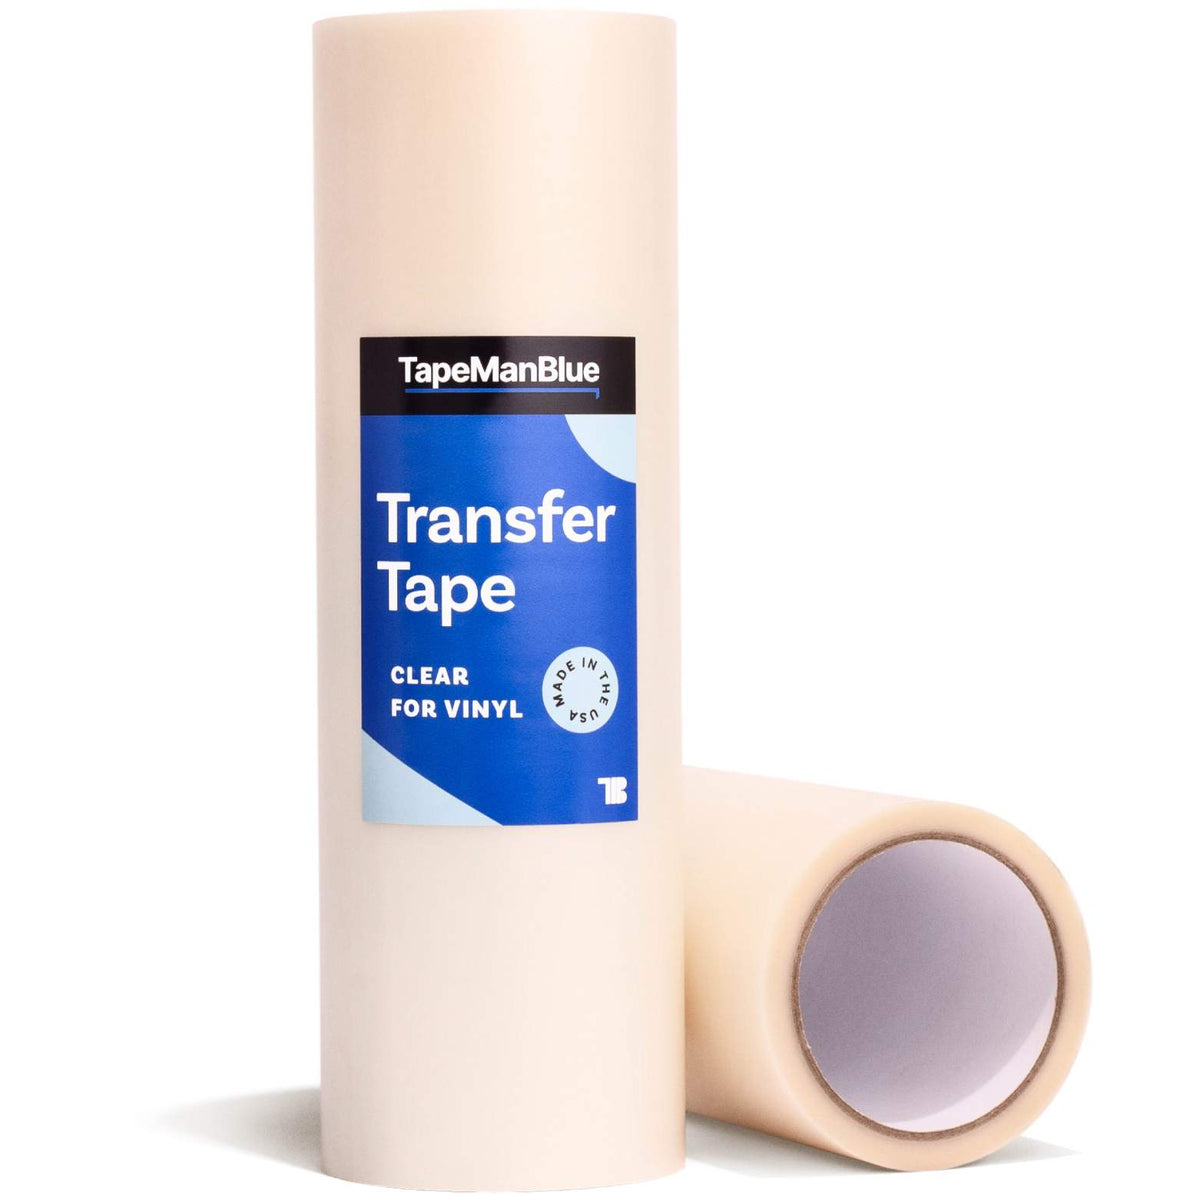 the OG, one and only @tapemanblue transfer tape will literally